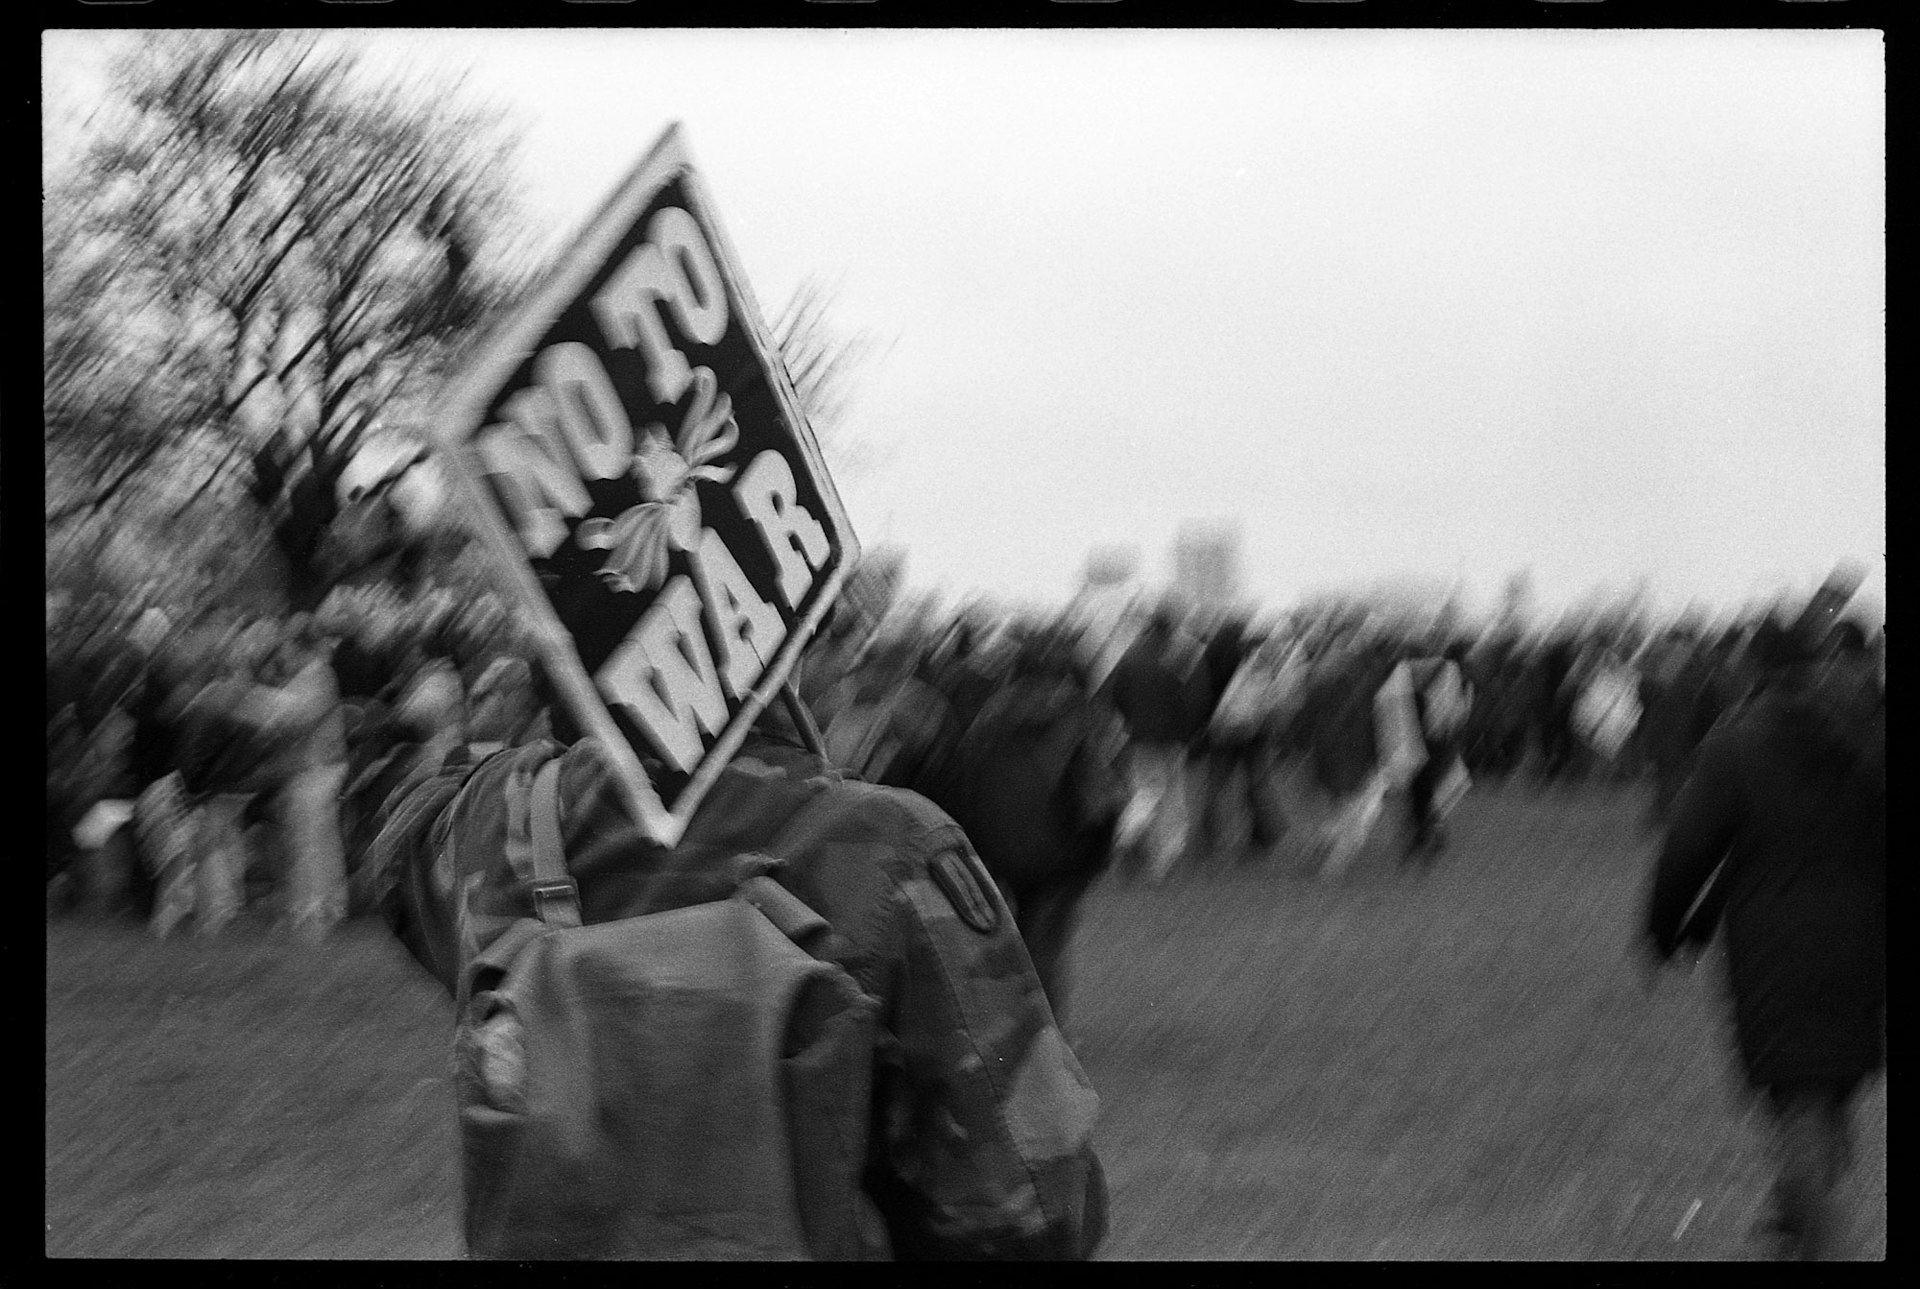 WEB_STW_no-to-war-sign_hyde-park-2003_dannyburrows